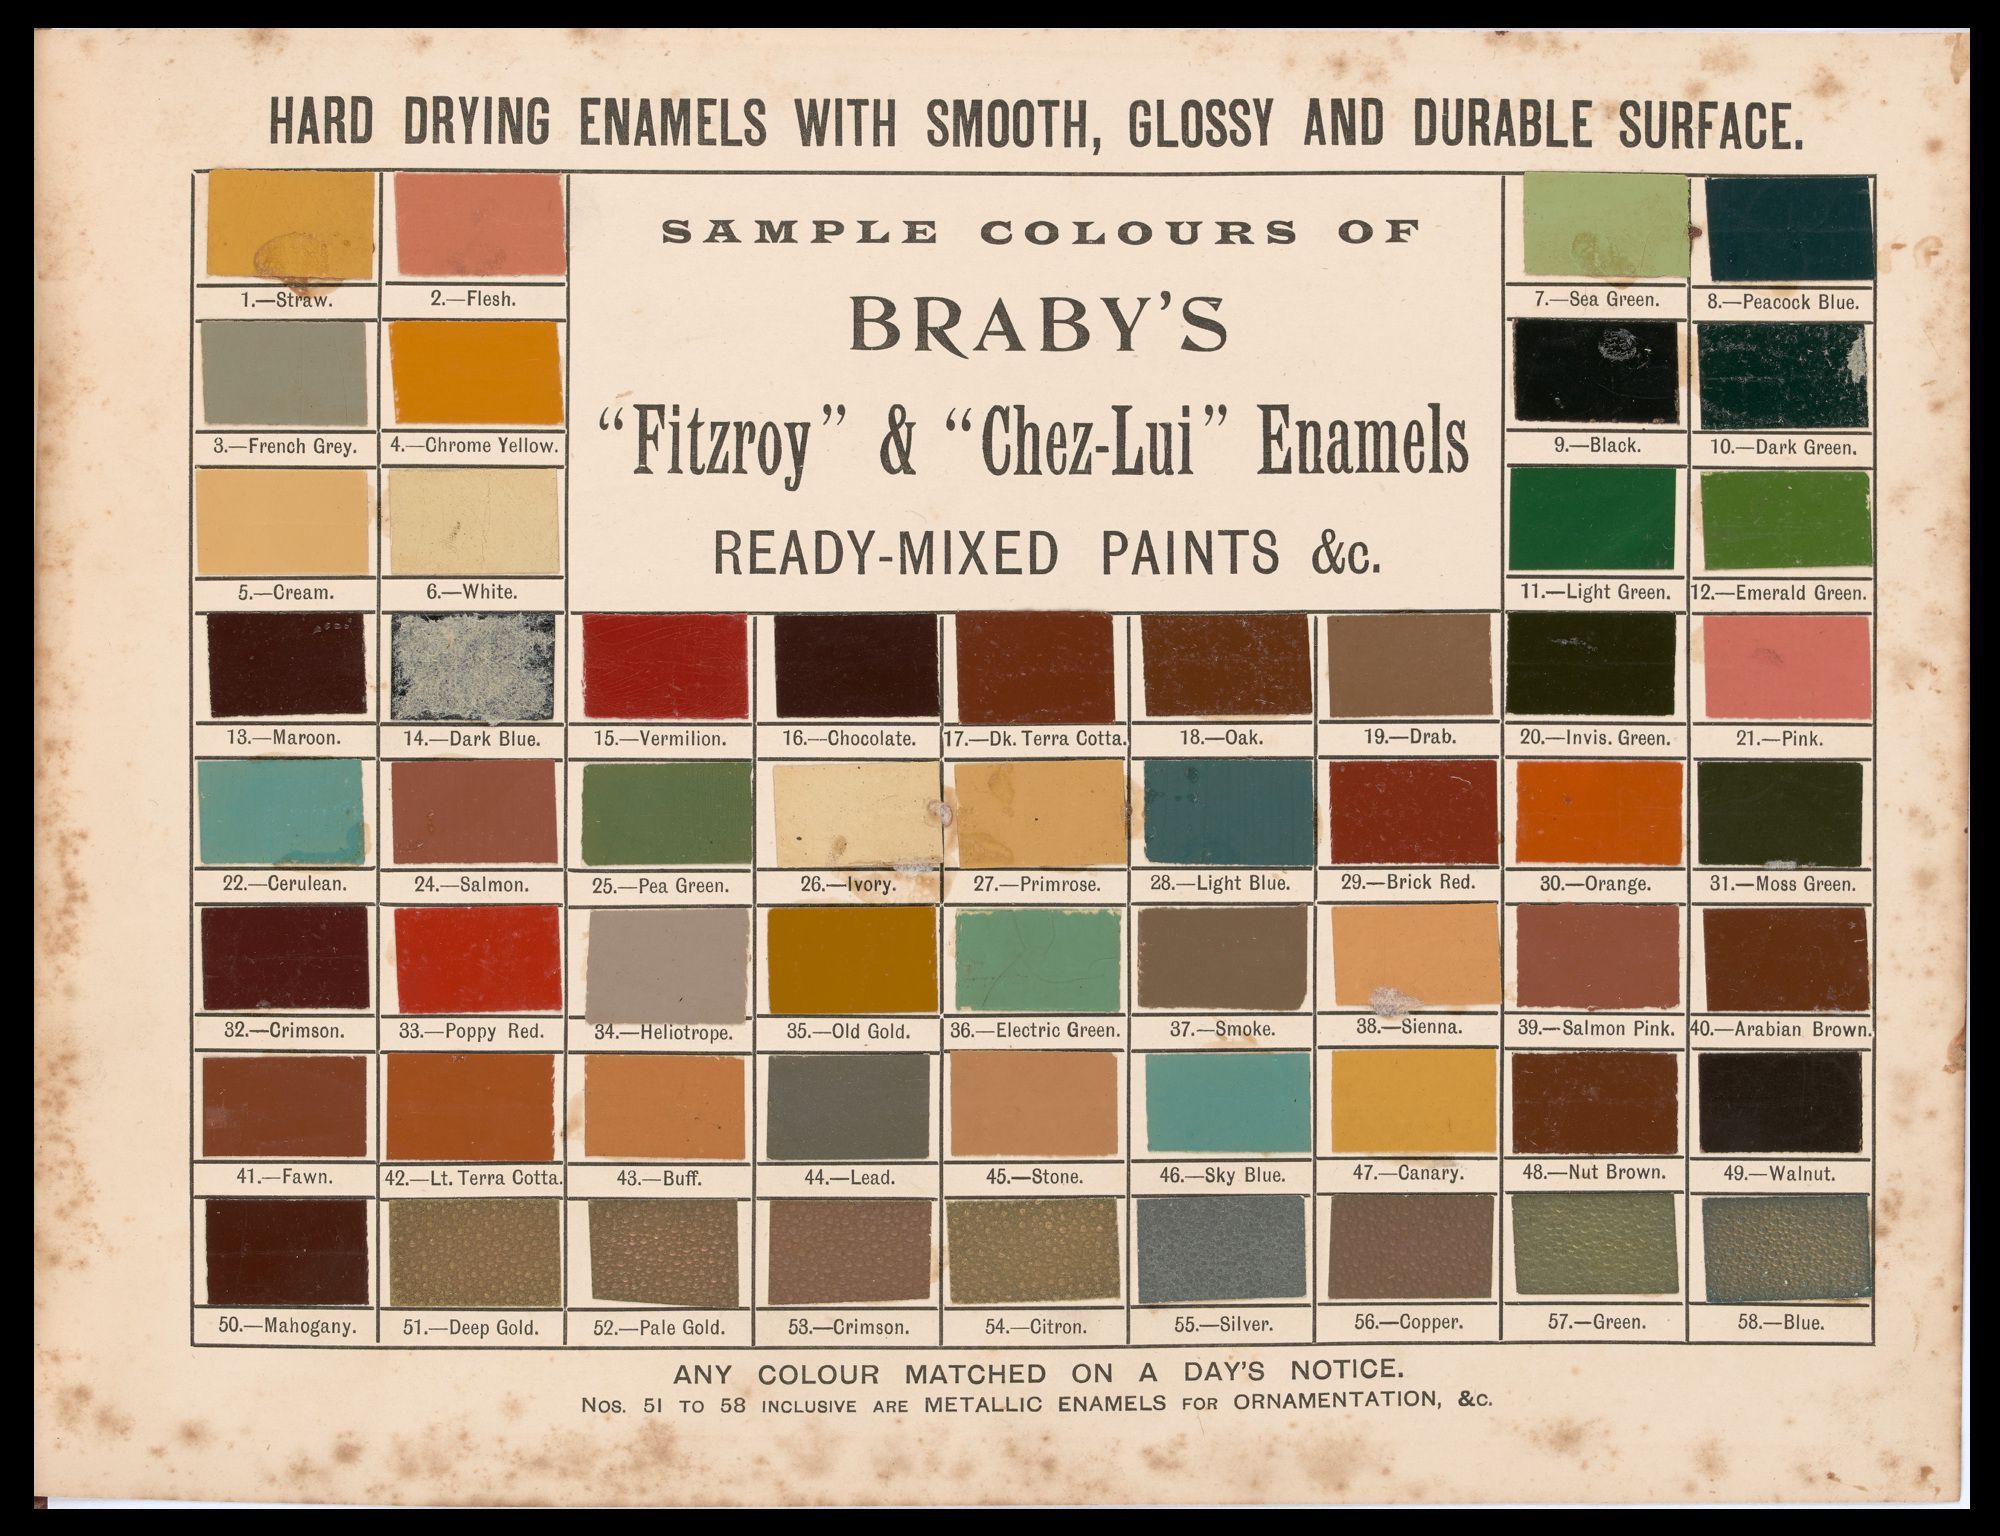 Sample colours of Braby's Enamels, Ready-mixed paints etc